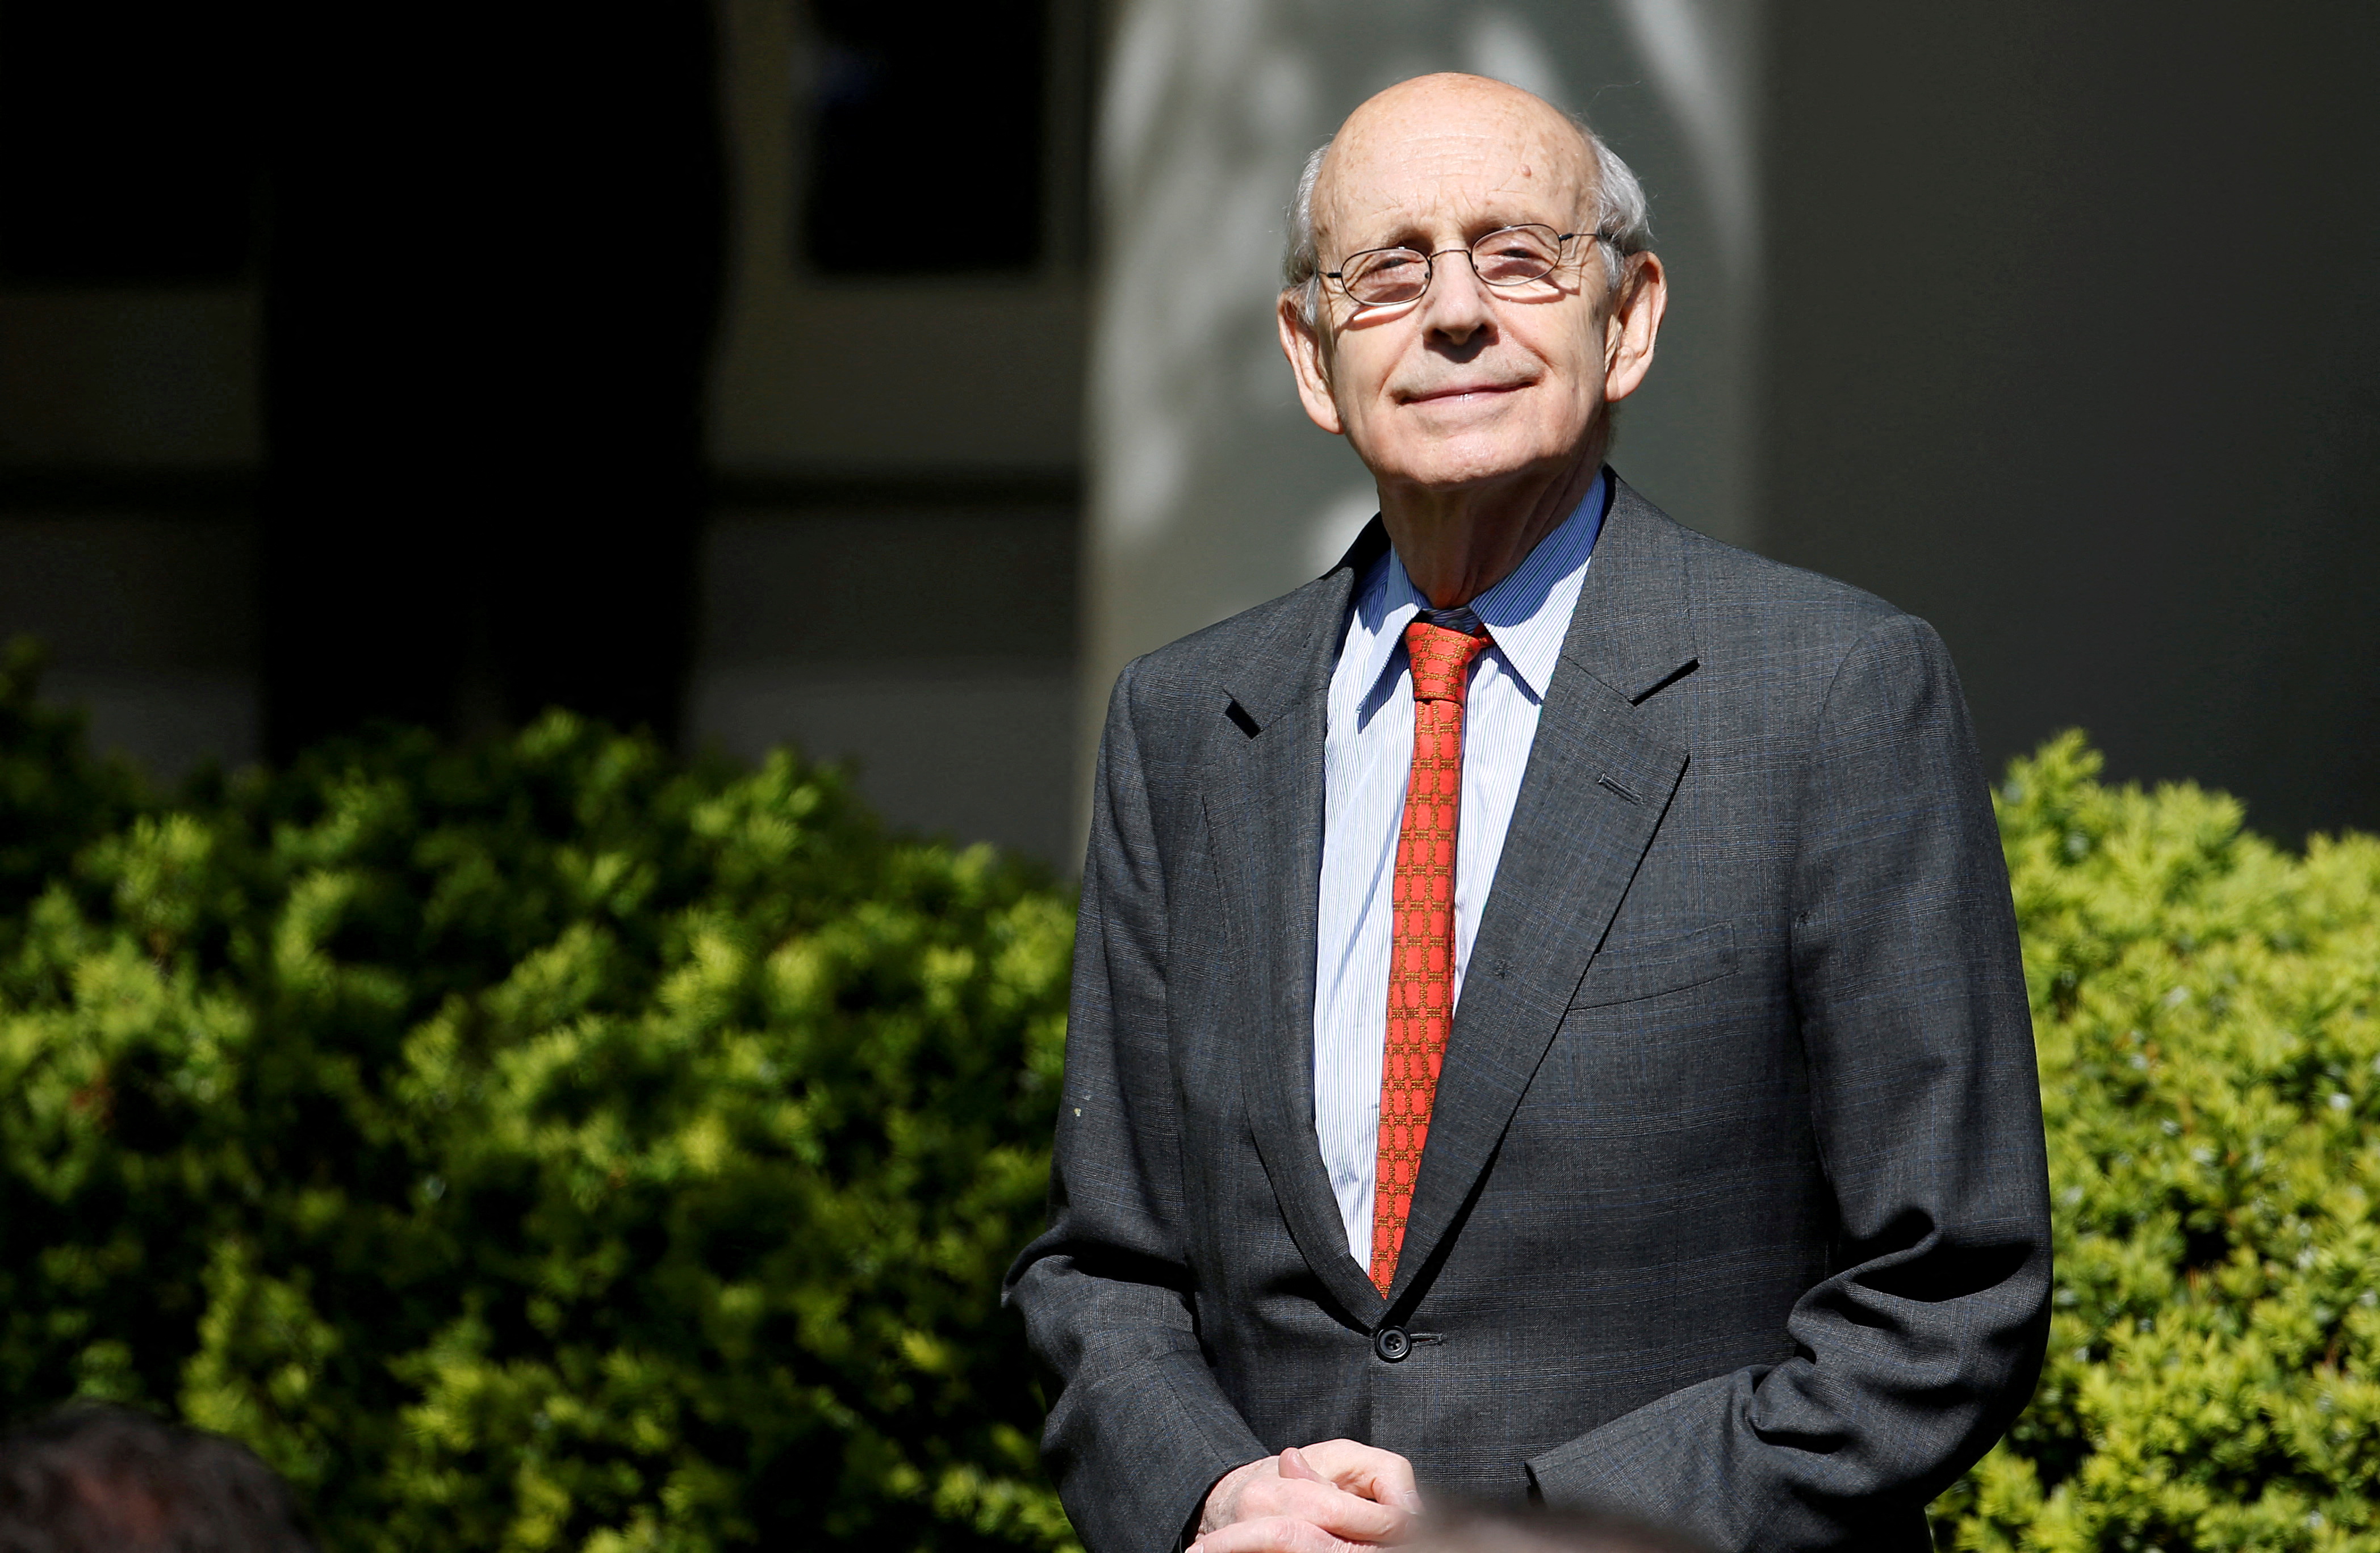 Associate Supreme Court Justice Stephen Breyer arrives for the swearing in ceremony of Judge Neil Gorsuch as an Associate Supreme Court Justice in the Rose Garden of the White House in Washington